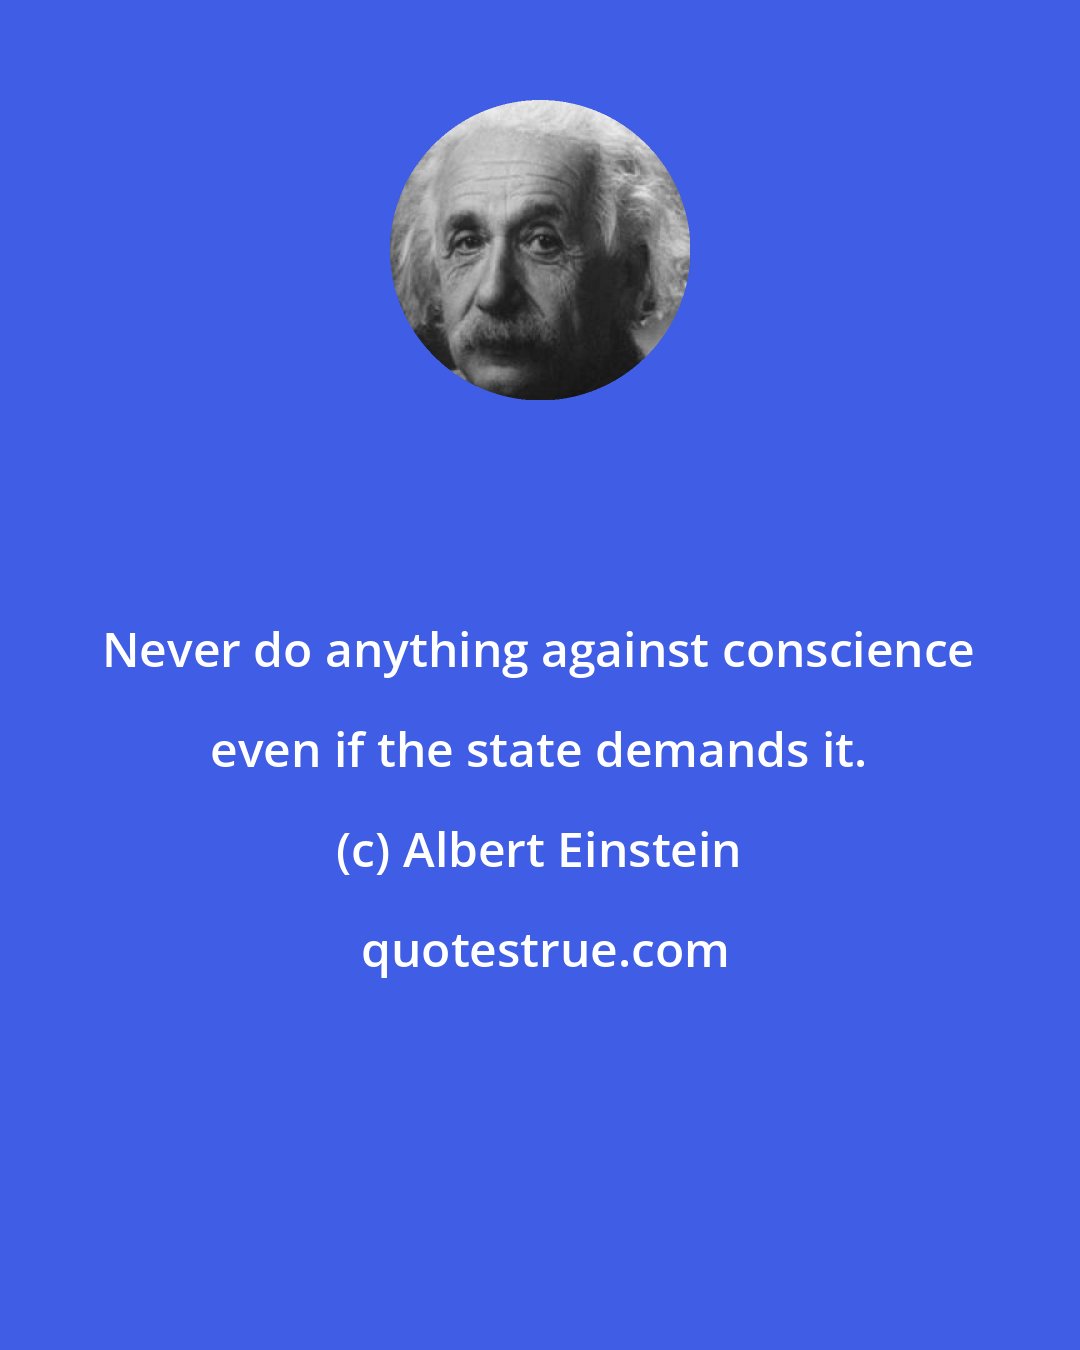 Albert Einstein: Never do anything against conscience even if the state demands it.